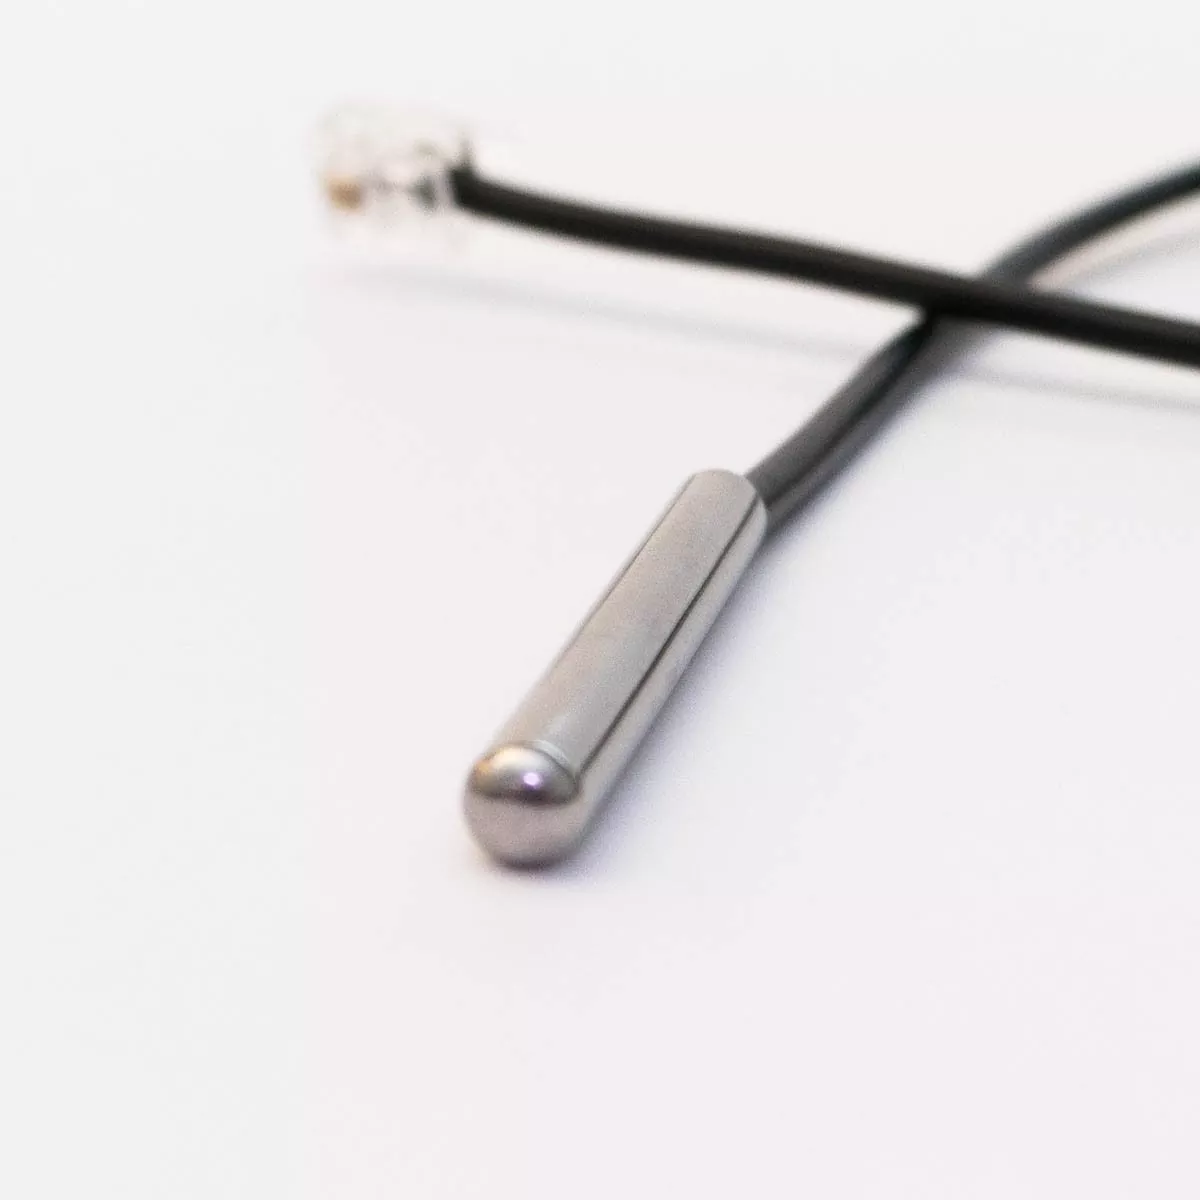 Temperature Sensors and Why You Need Them